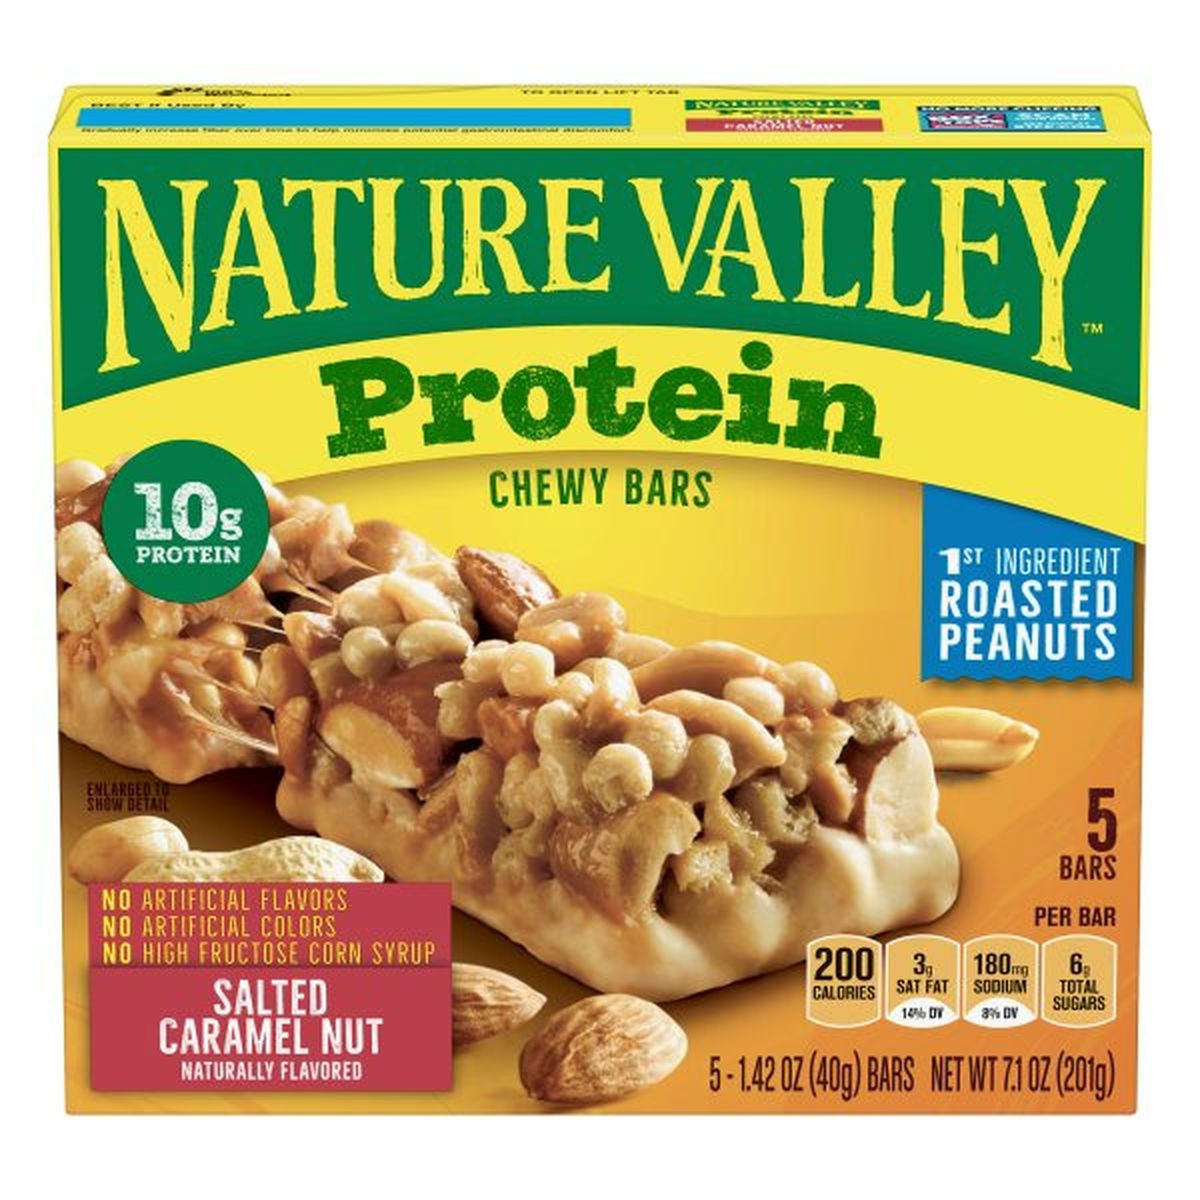 Calories in Nature Valley Chewy Bars, Salted Caramel Nut, Protein